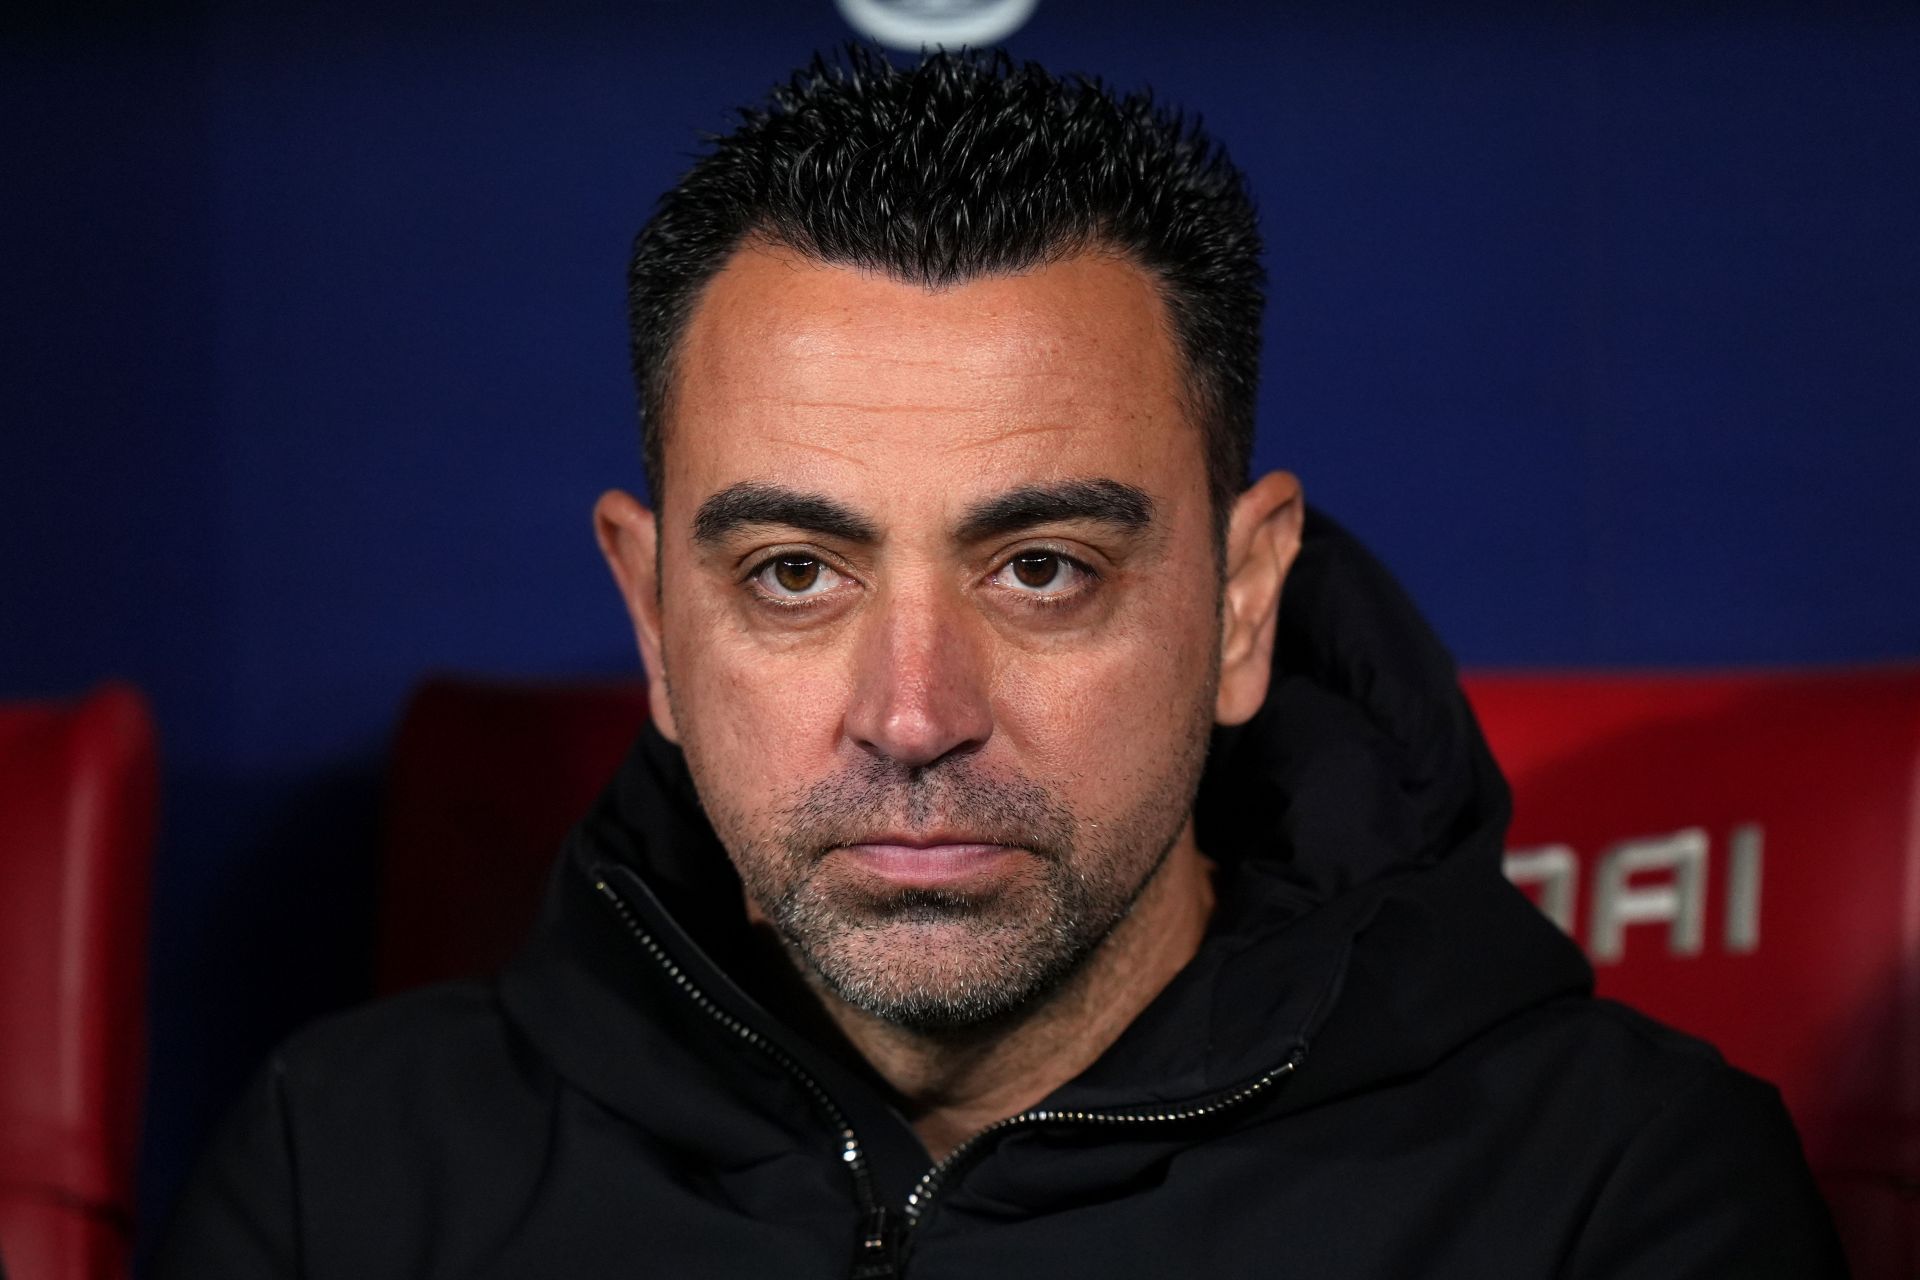 Xavi announced in the end of January that he would leave the club.